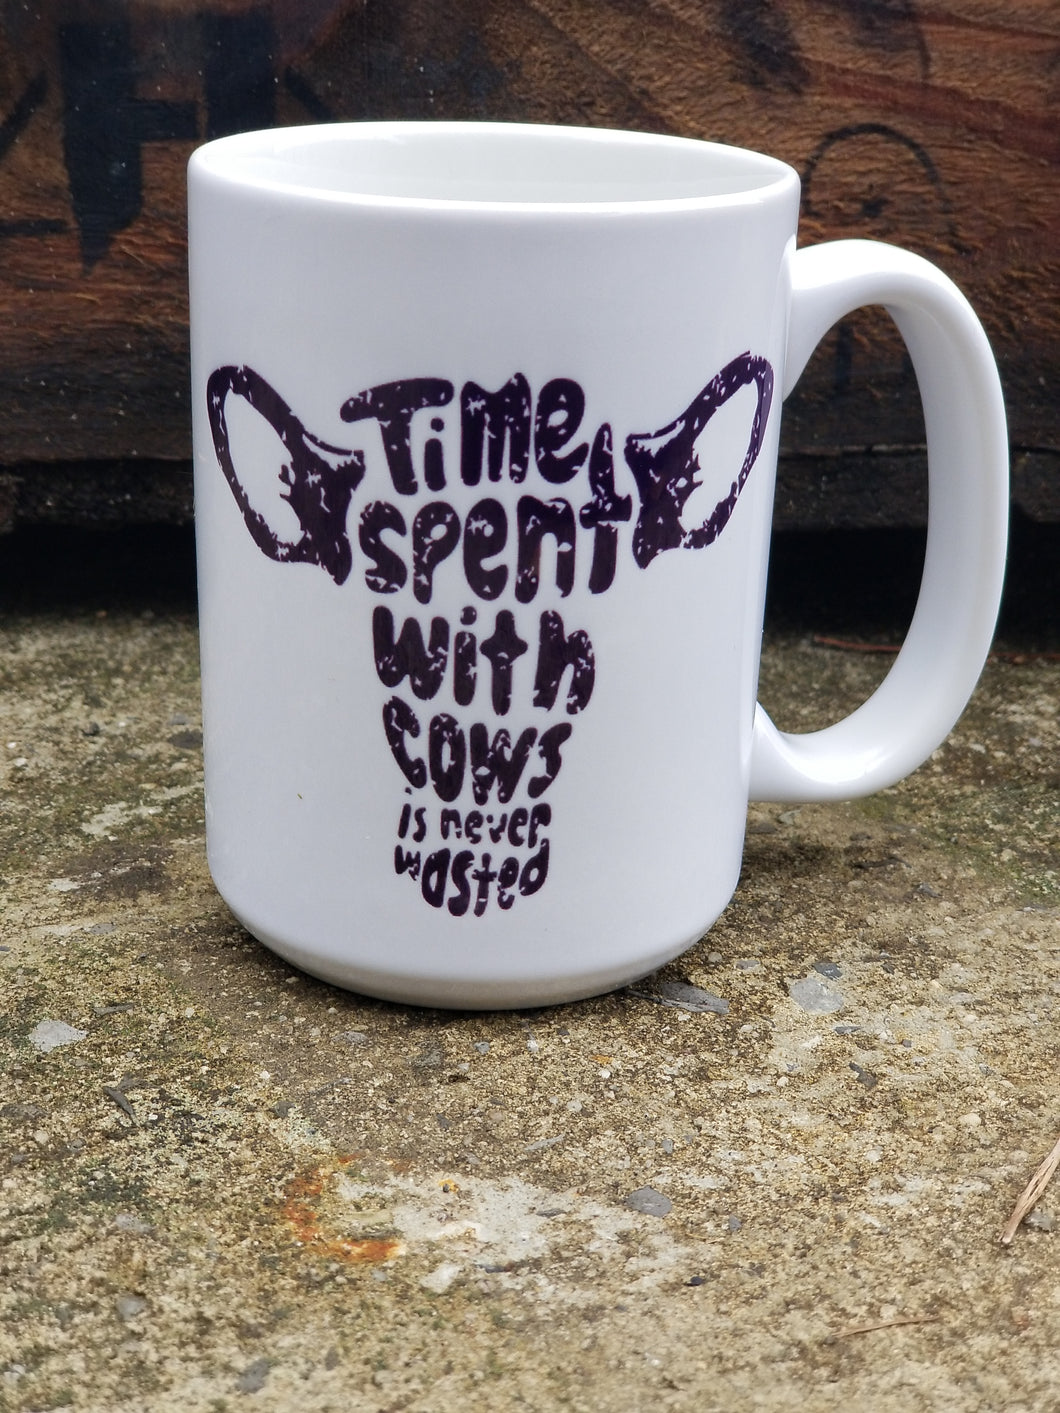 Time Spent with Cows Mug